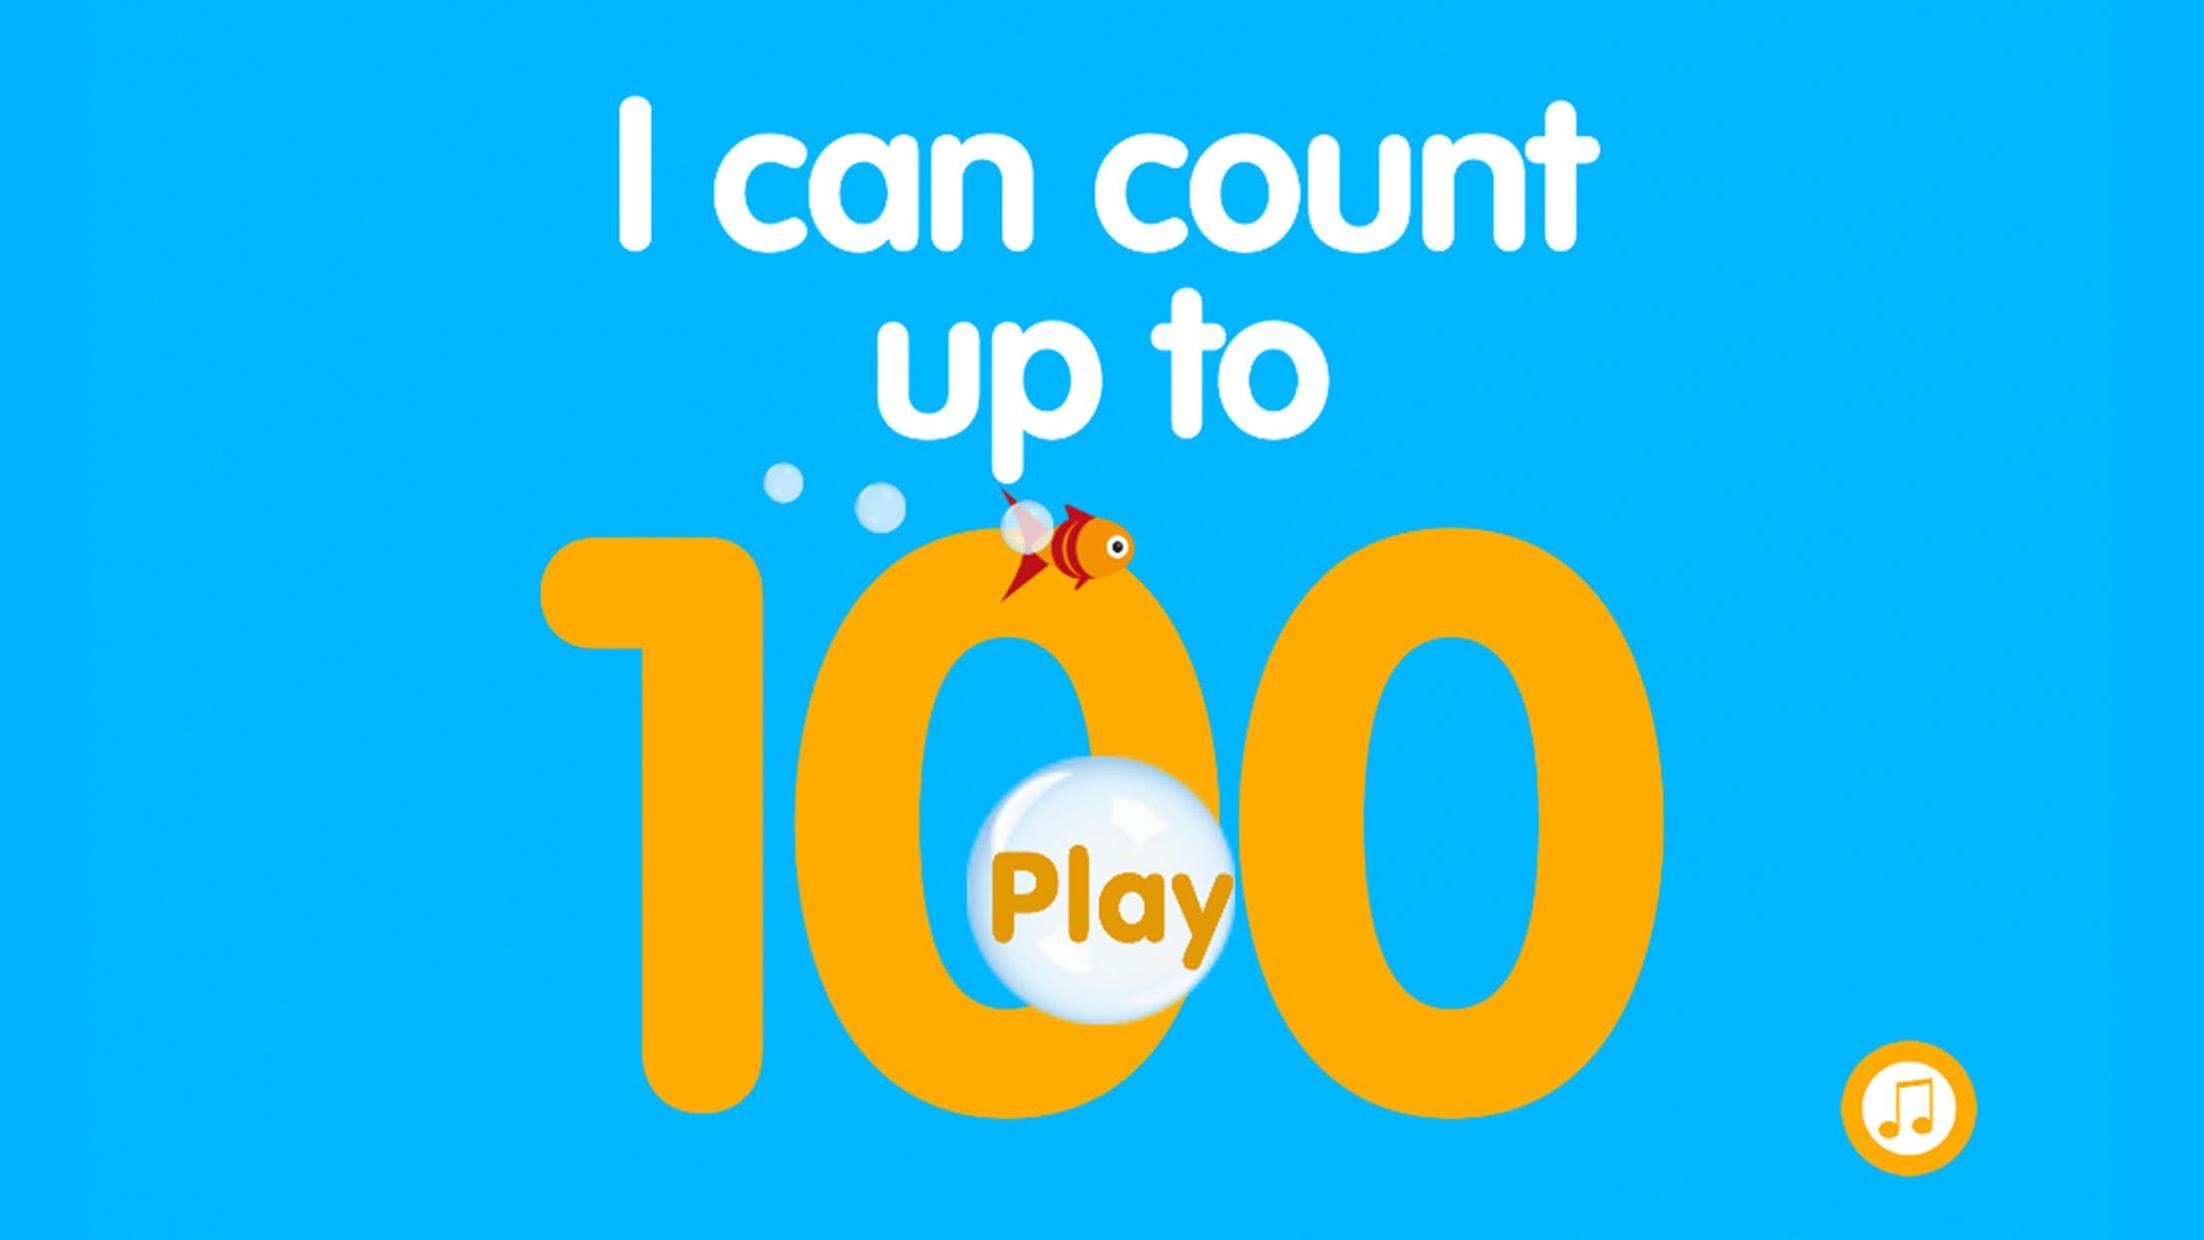 I Can Count Up To 100